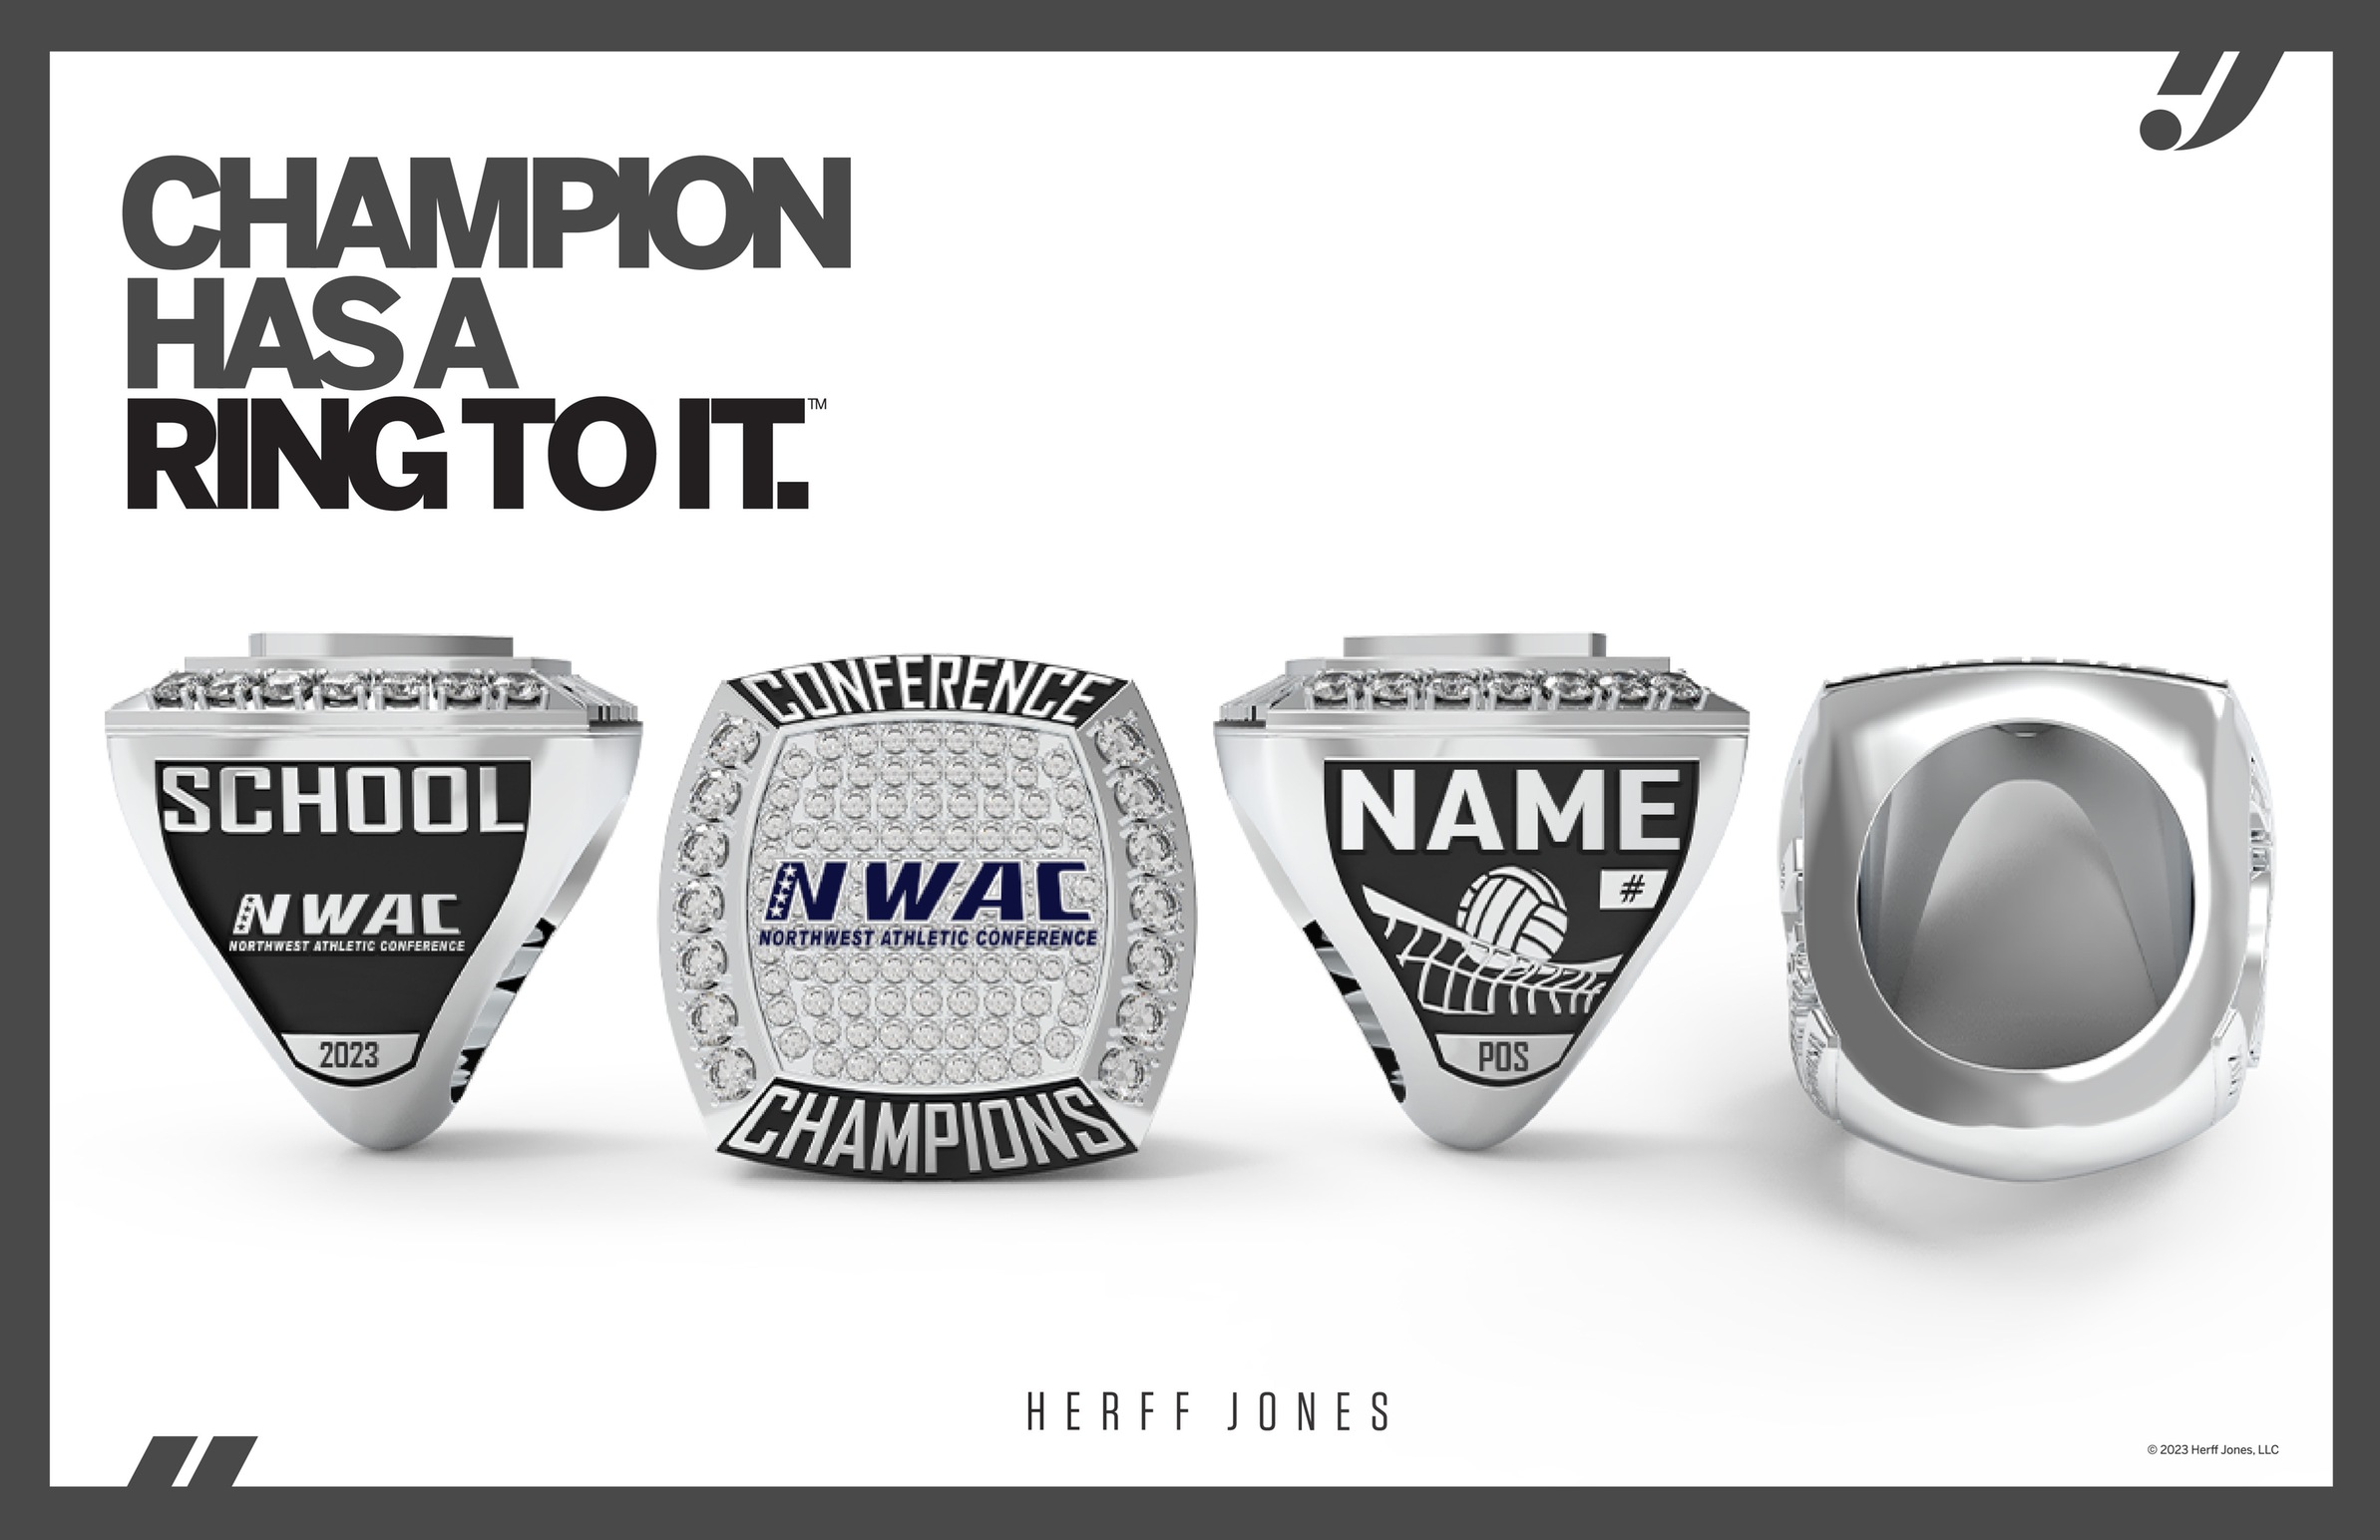 Herff Jones banner ad - Champion has a ring to it. Official ring provider of the NWAC.